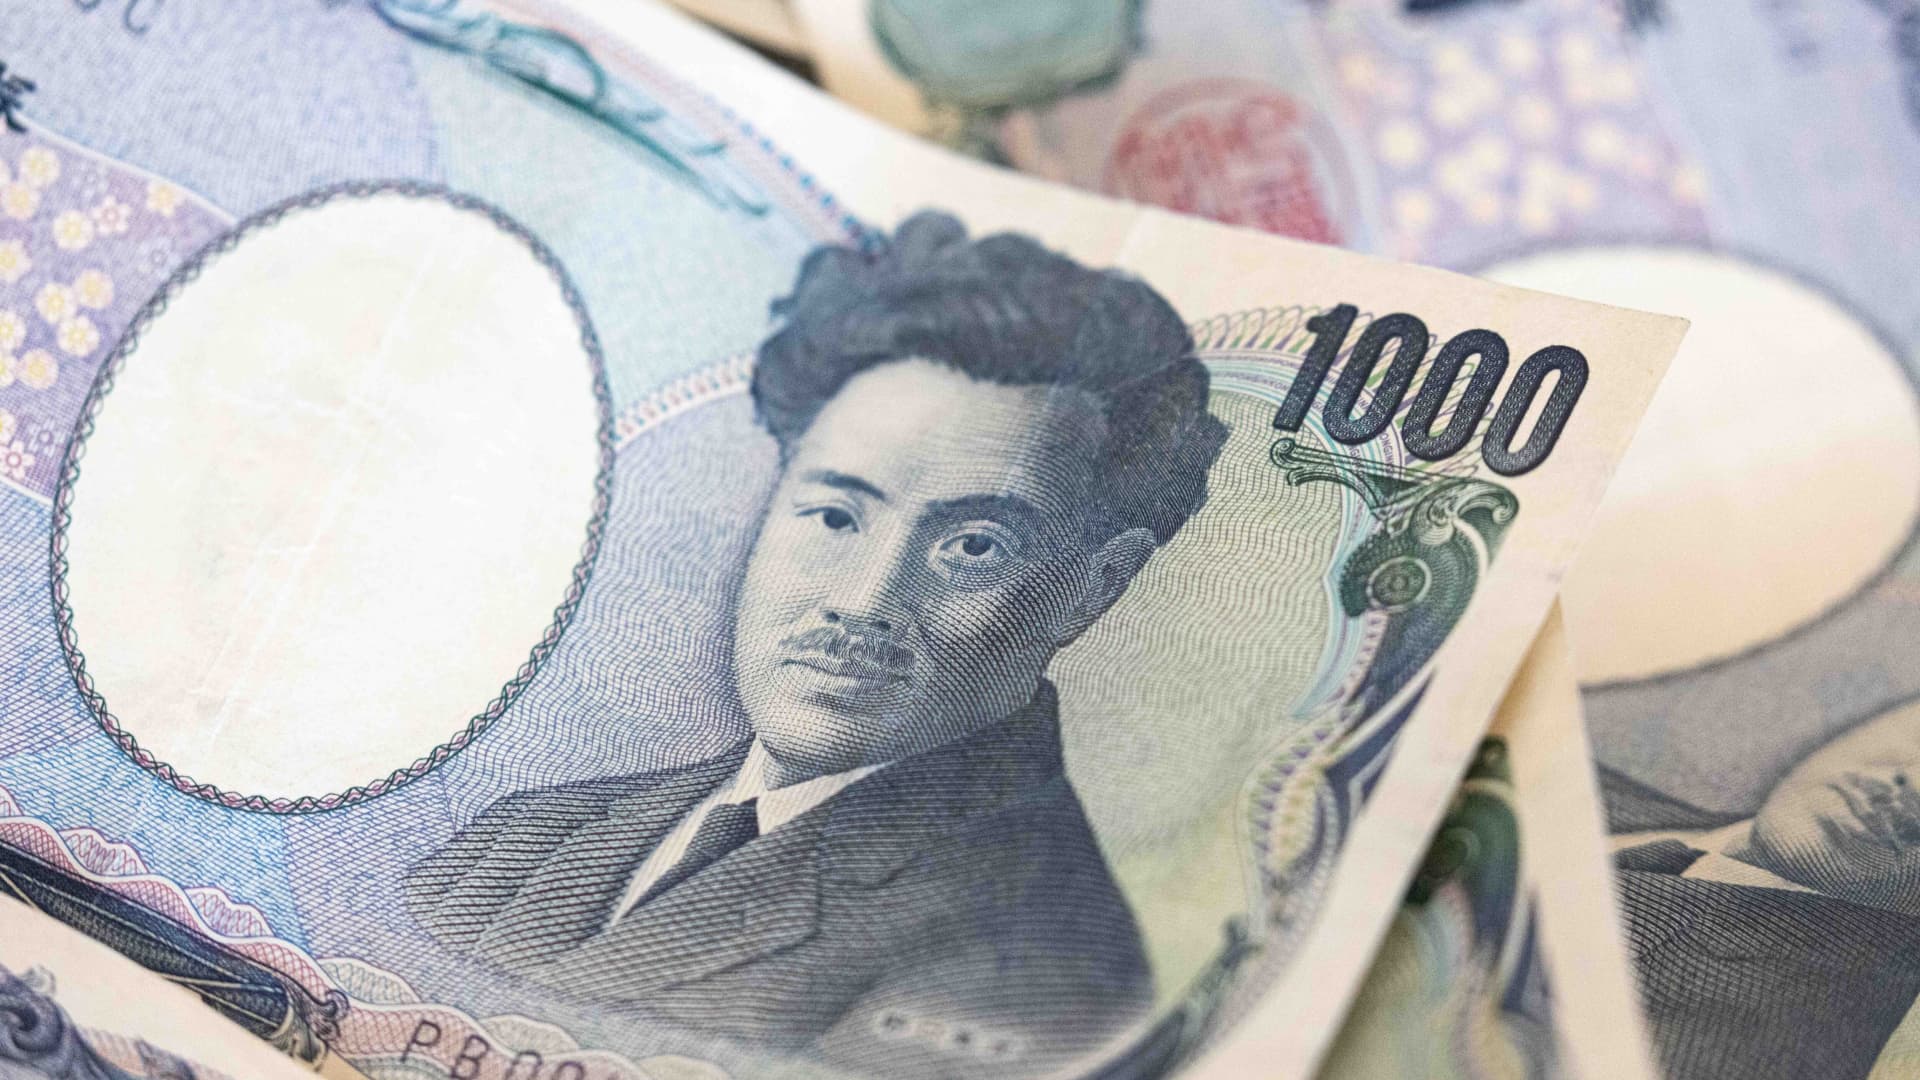 The Japanese yen has weakened significantly against the dollar in 2022.